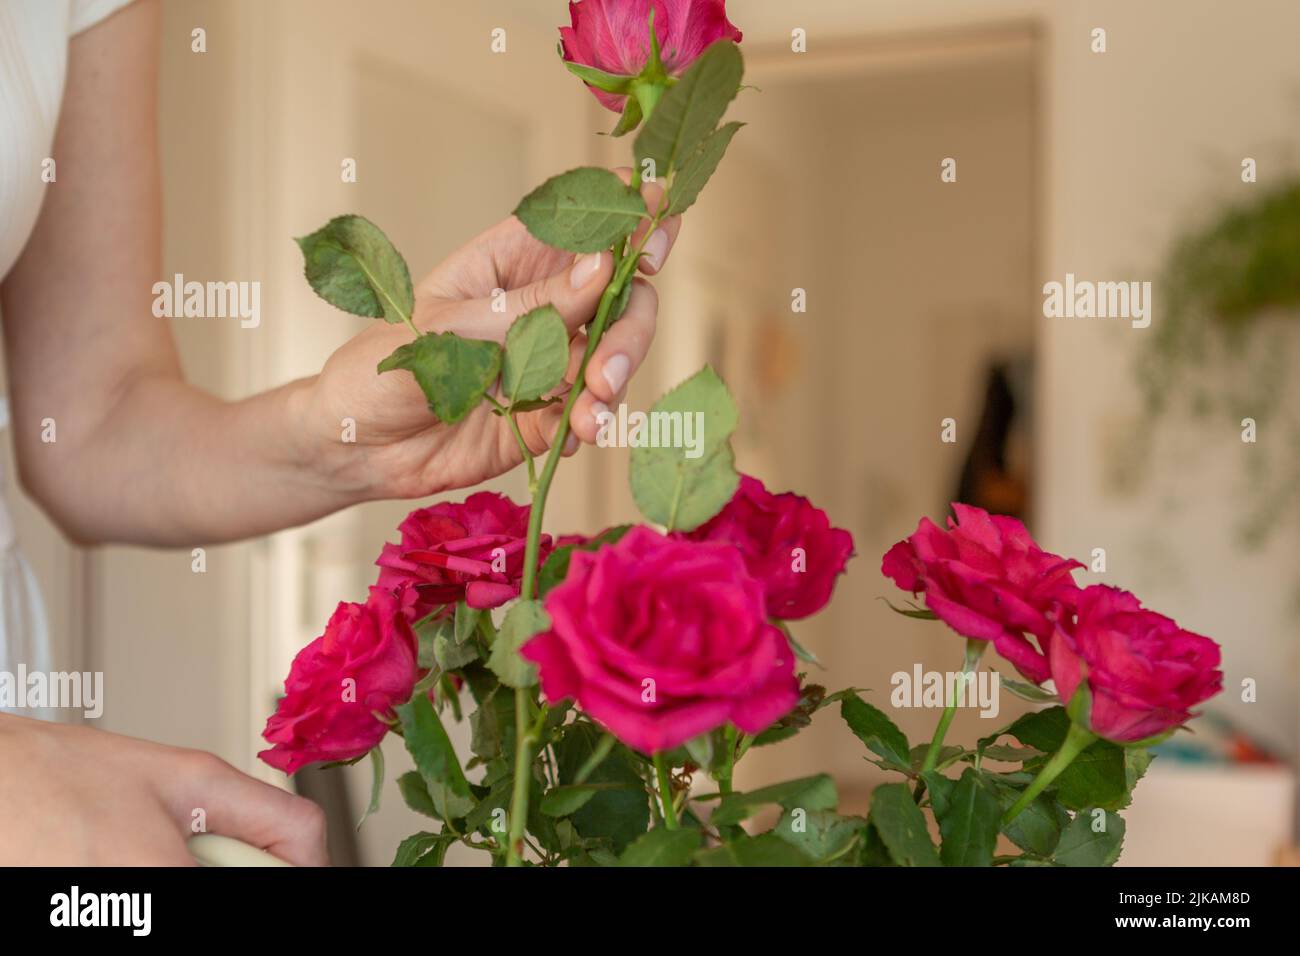 Woman hands cutting home a rose Stock Photo